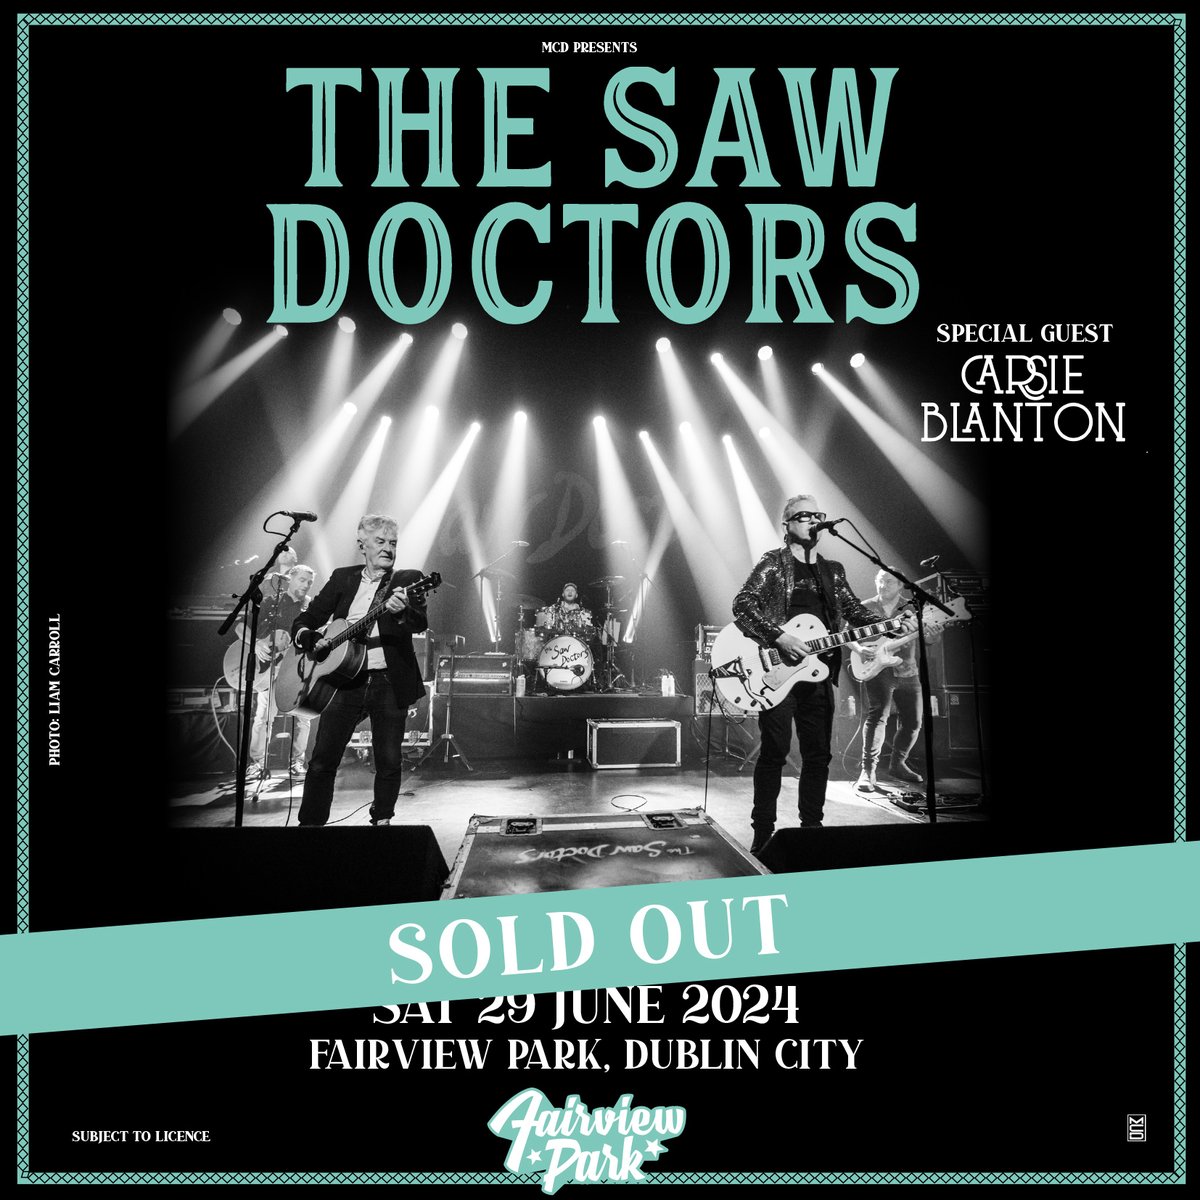 ✨ The amazing Carsie Blanton has now been added as special guest for @sawdoctors sold out #fairviewpark show this June! ⚡️